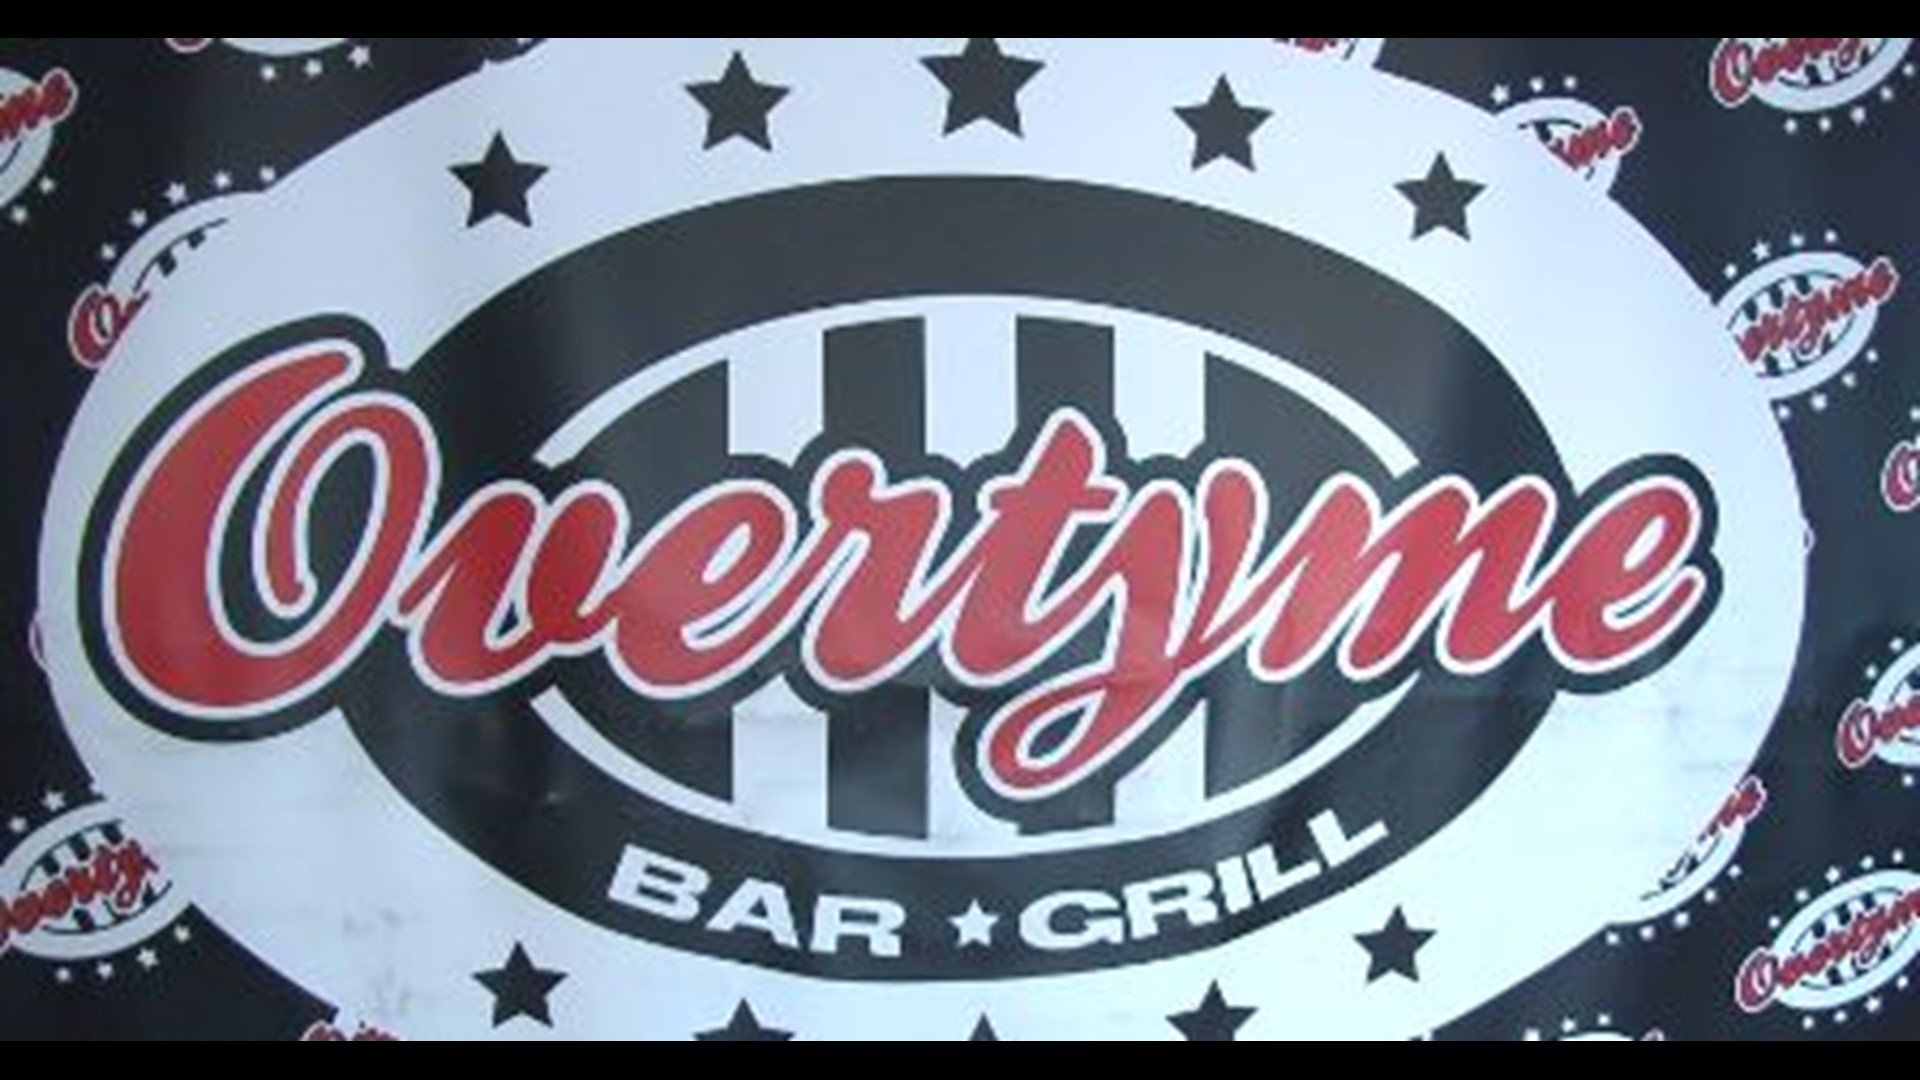 Overtyme Bar and Grill has been cited four times by the sheriff's office for violating the governor's executive order by being overcapacity